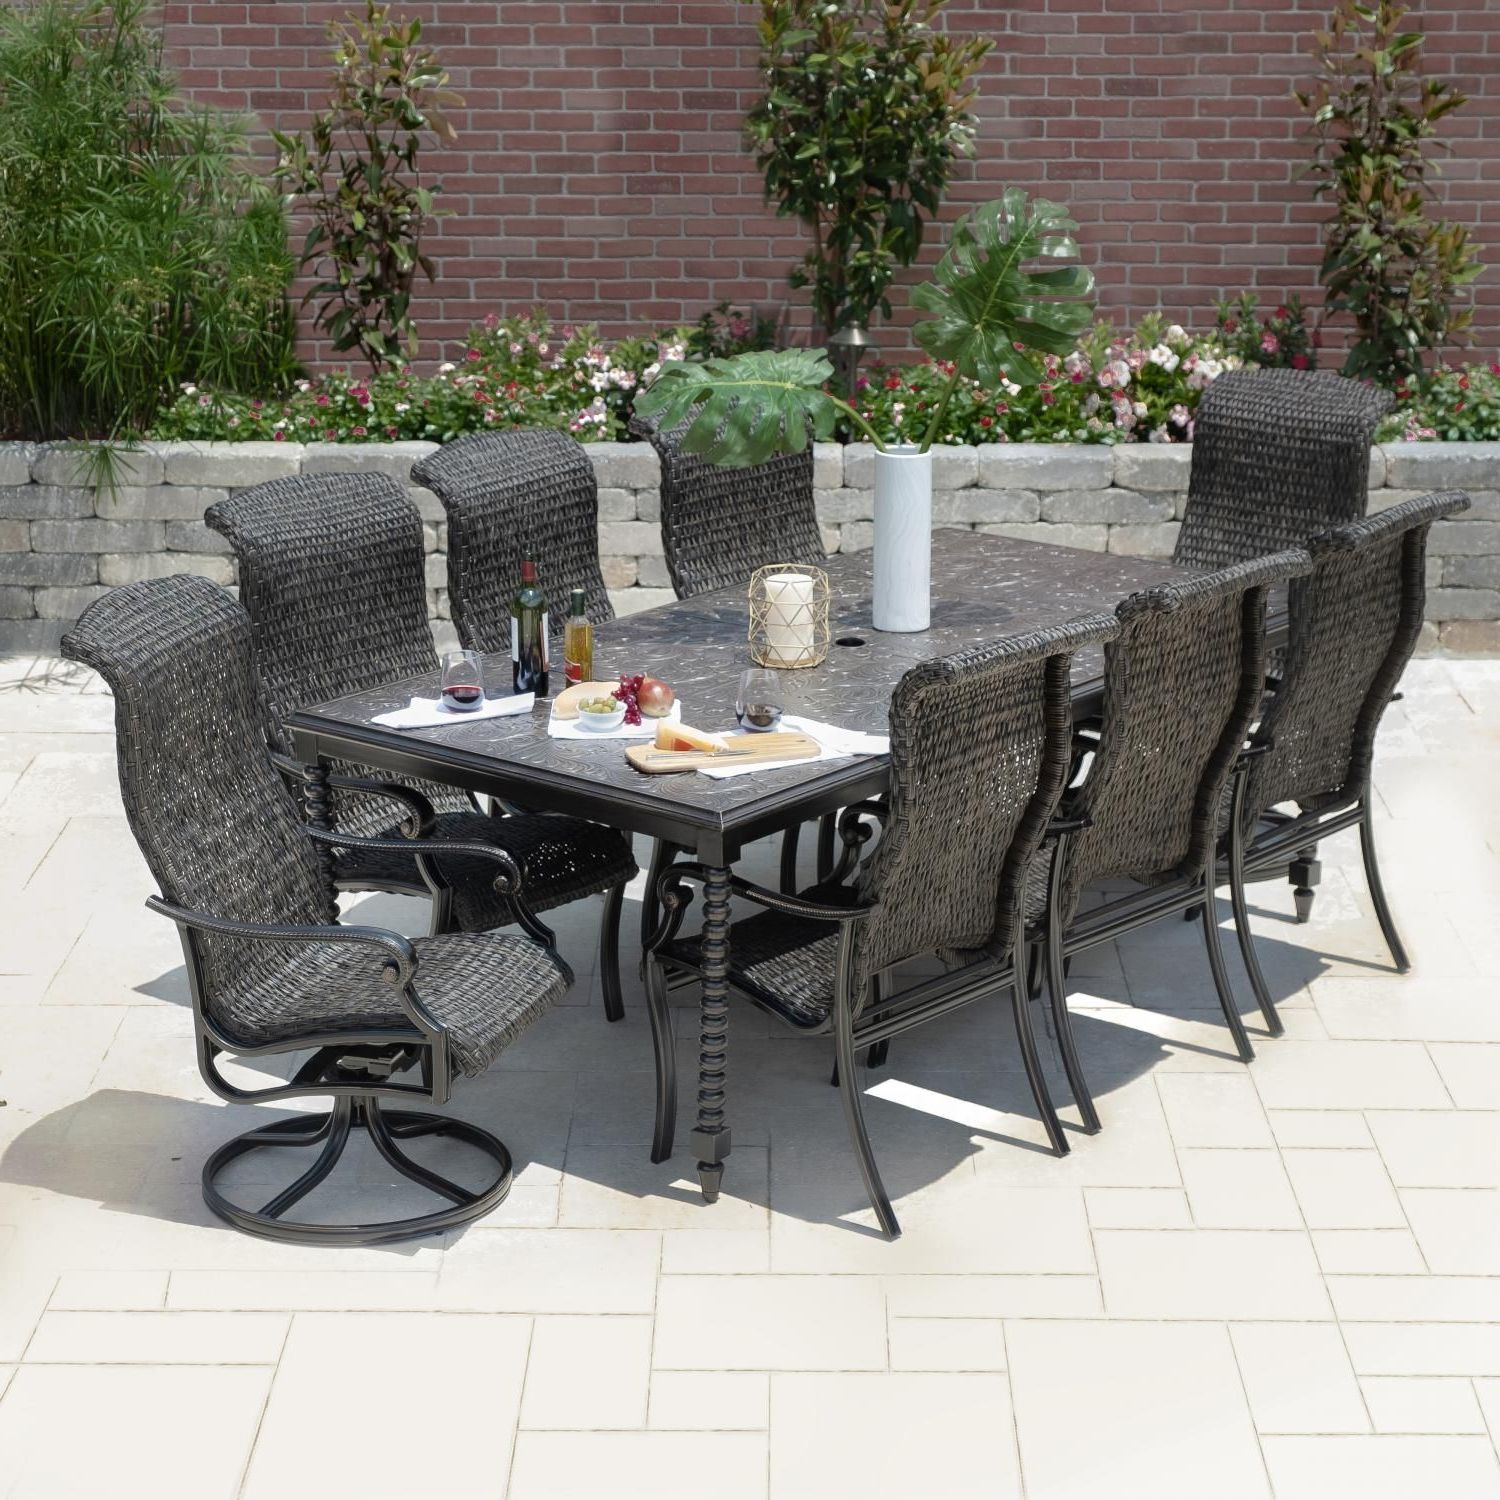 Trendy Du Monde 9 Piece Banana Leaf Wicker Patio Dining Set W/ 90 X 46 Inch Pertaining To Wicker Rectangular Patio Dining Sets (View 9 of 15)